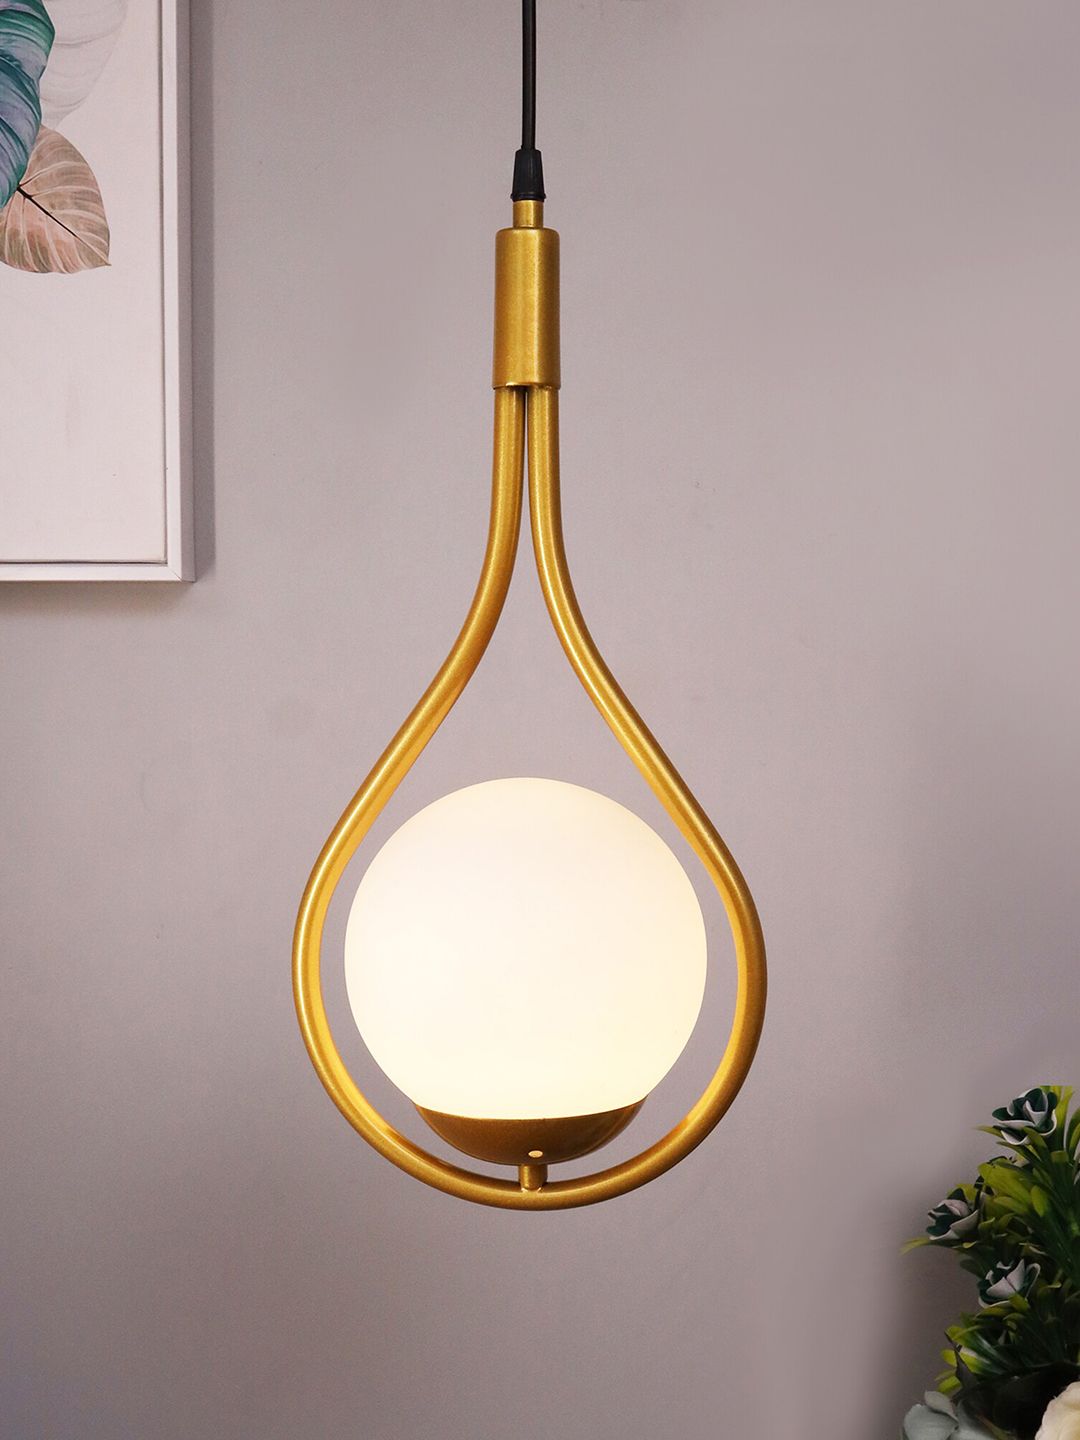 Homesake Gold-Toned & White Water Drop White Frosted Glass Globe Lampshade Ceiling Lamp Price in India